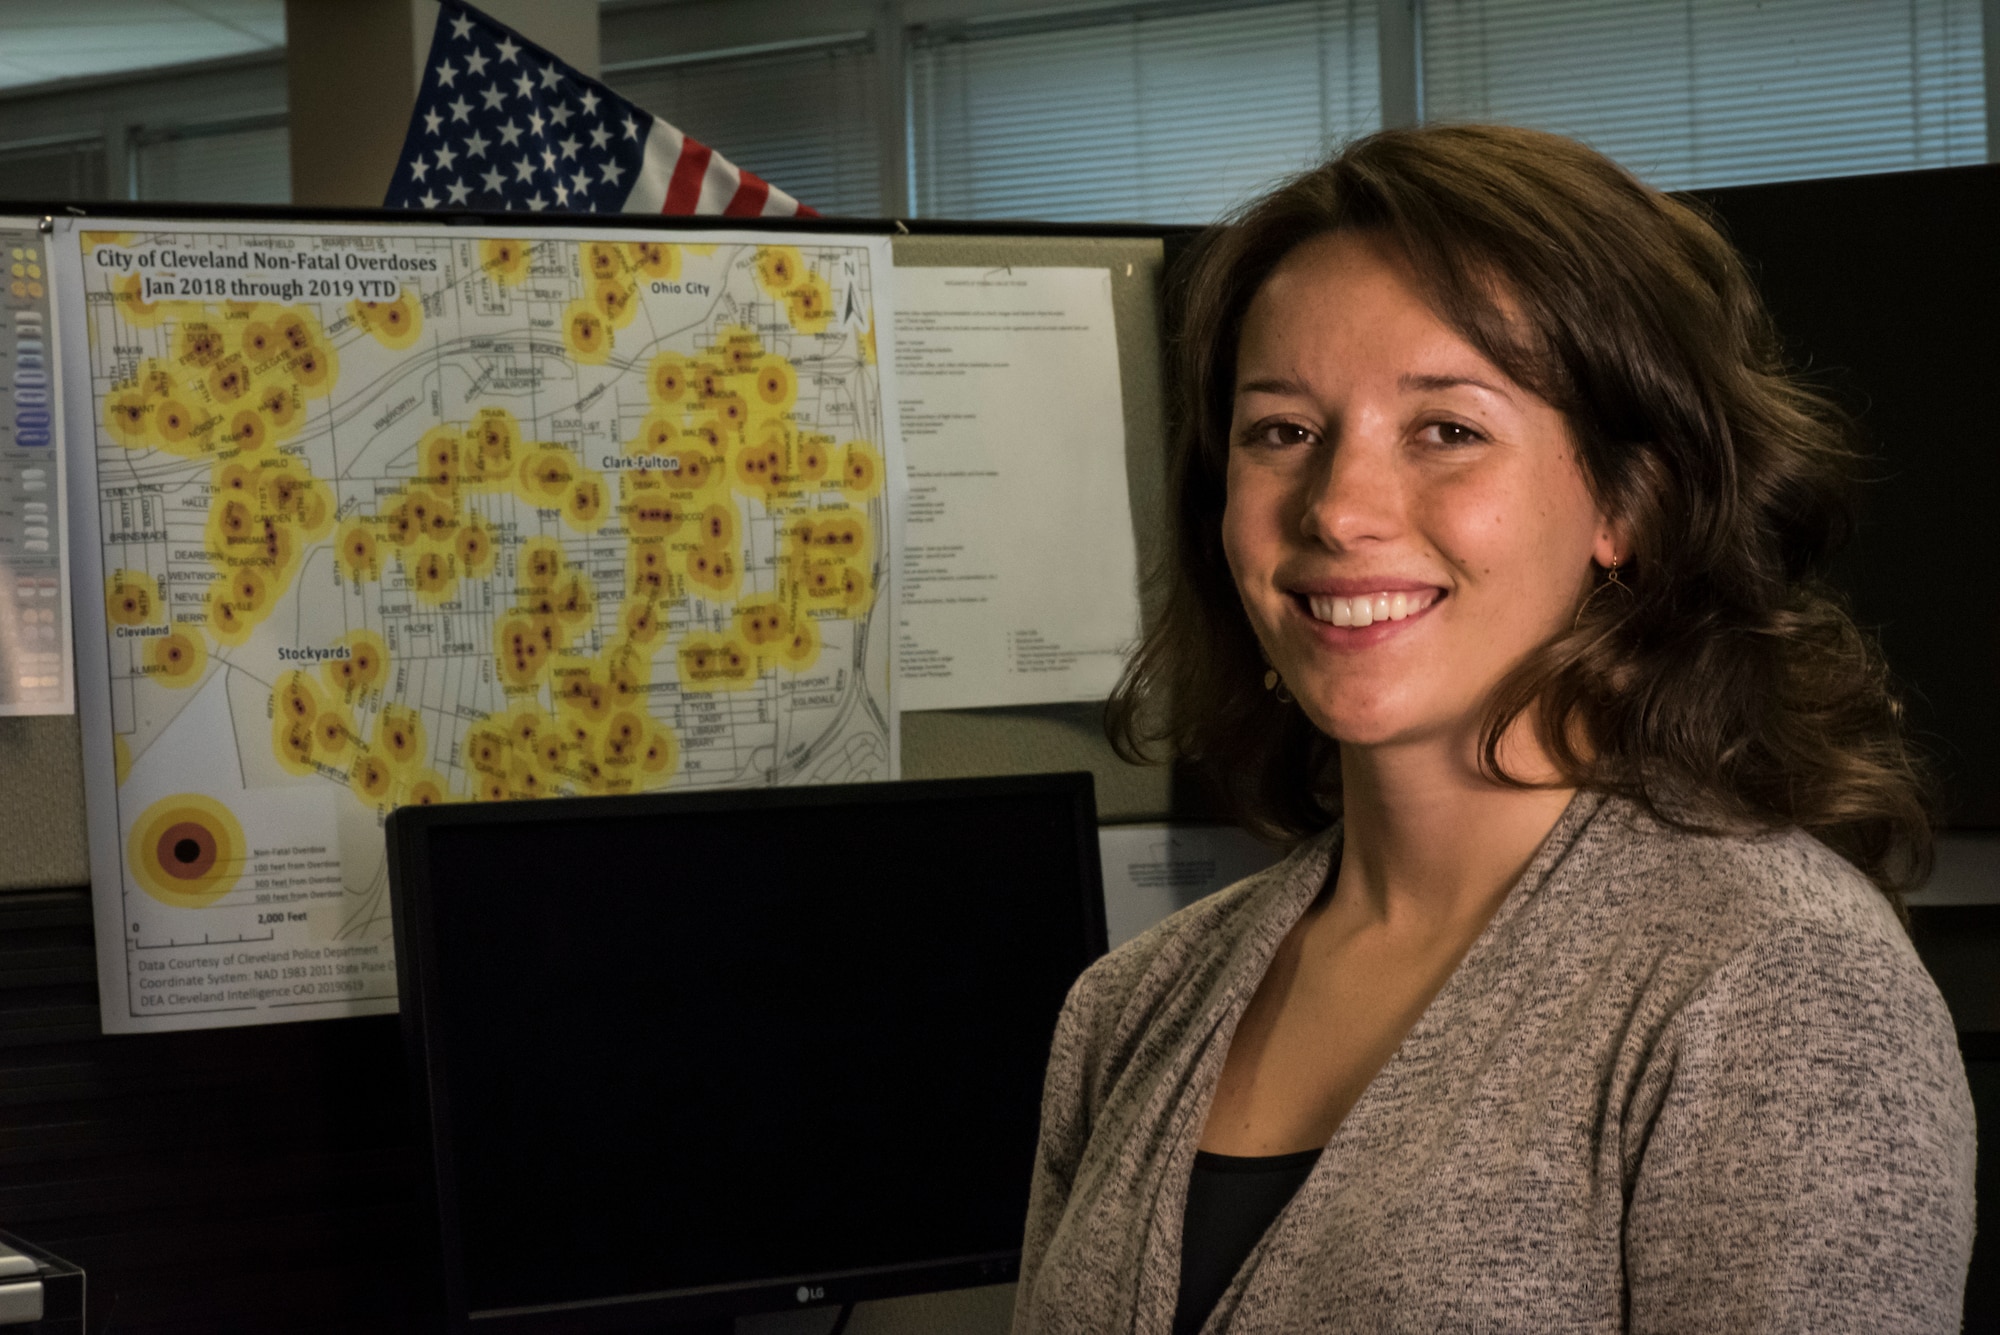 U.S. Air Force Staff Sgt. Carolyn Kinzel, a C-130H Hercules loadmaster assigned to the 179th Airlift Wing, Ohio Air National Guard, and an Ohio Air National Guard Counterdrug Task Force criminal analyst, poses in front of an overdose map she created Aug. 1, 2019, at the Drug Enforcement Administration (DEA), Cleveland, Ohio. The Ohio National Guard Counterdrug Task Force personnel provide support to law enforcement agencies and community based organizations in order to enhance efforts to counter and defeat the threat of illegal substances, trafficking and violence in Ohio. (U.S. Air National Guard photo by Airman 1st Class Alexis Wade)